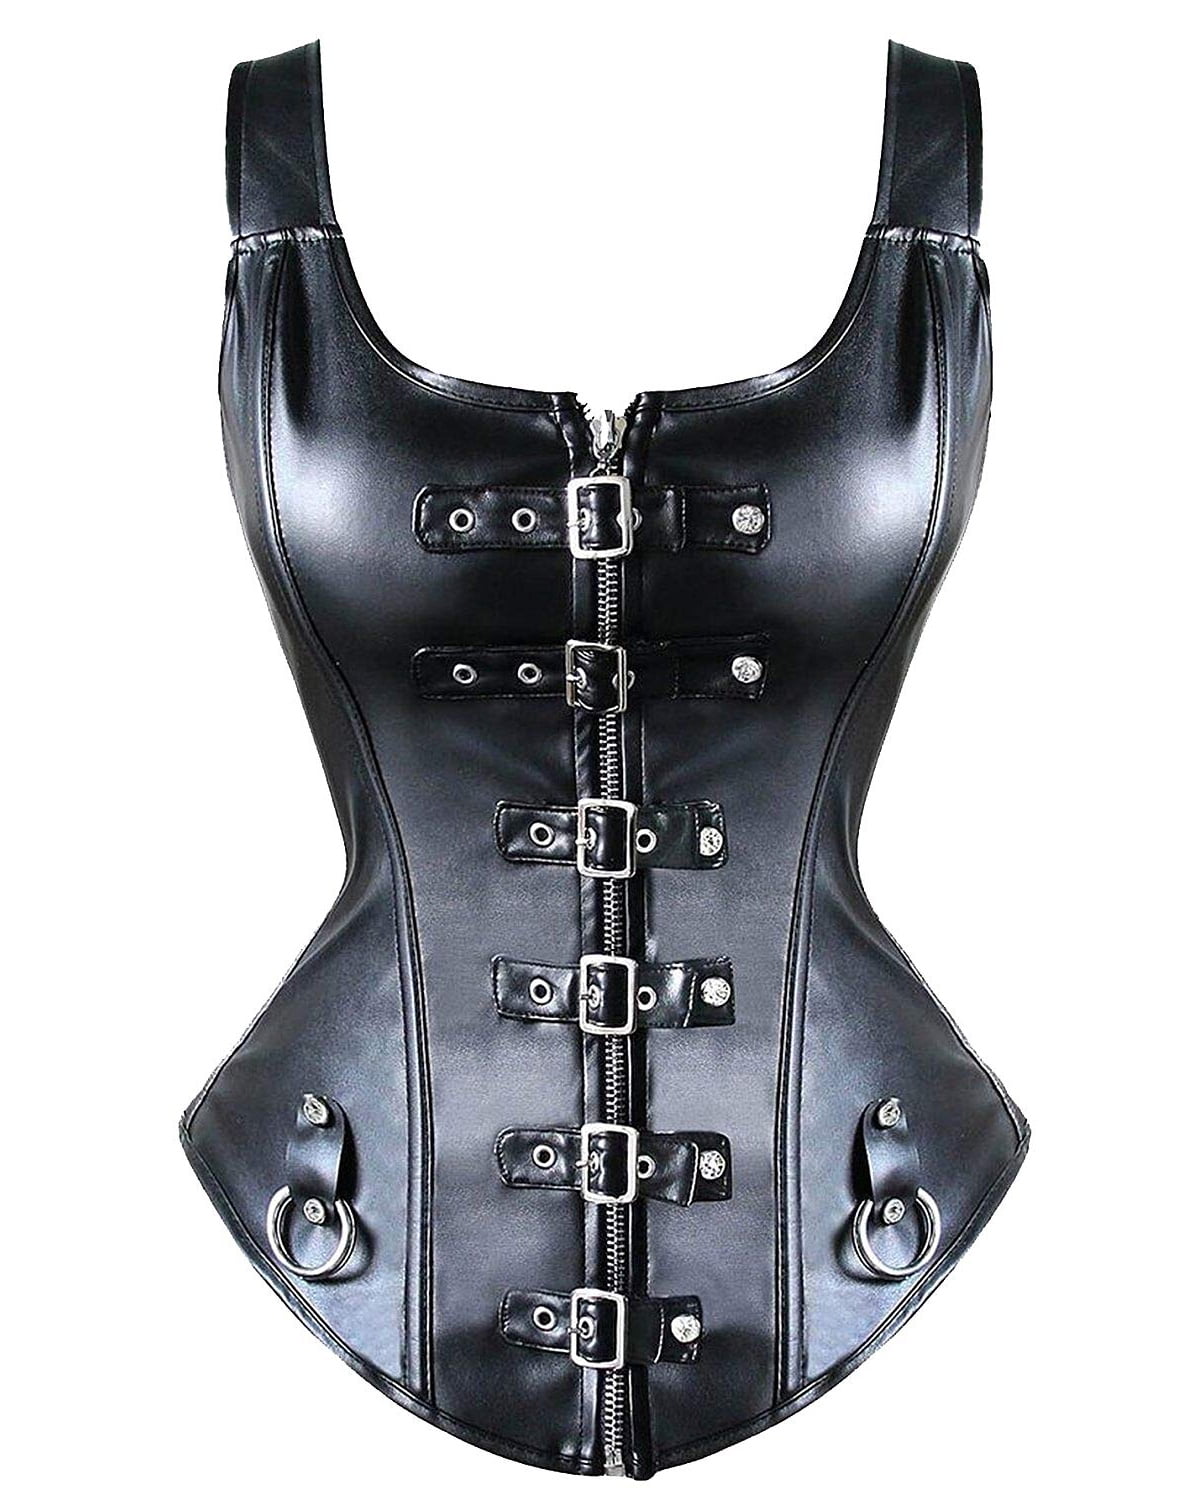 SLIMBELLE Steampunk Corset Bustier Gothic Vintage Satin Steel Boned with Chains Overbust Top for Women Leather G String 